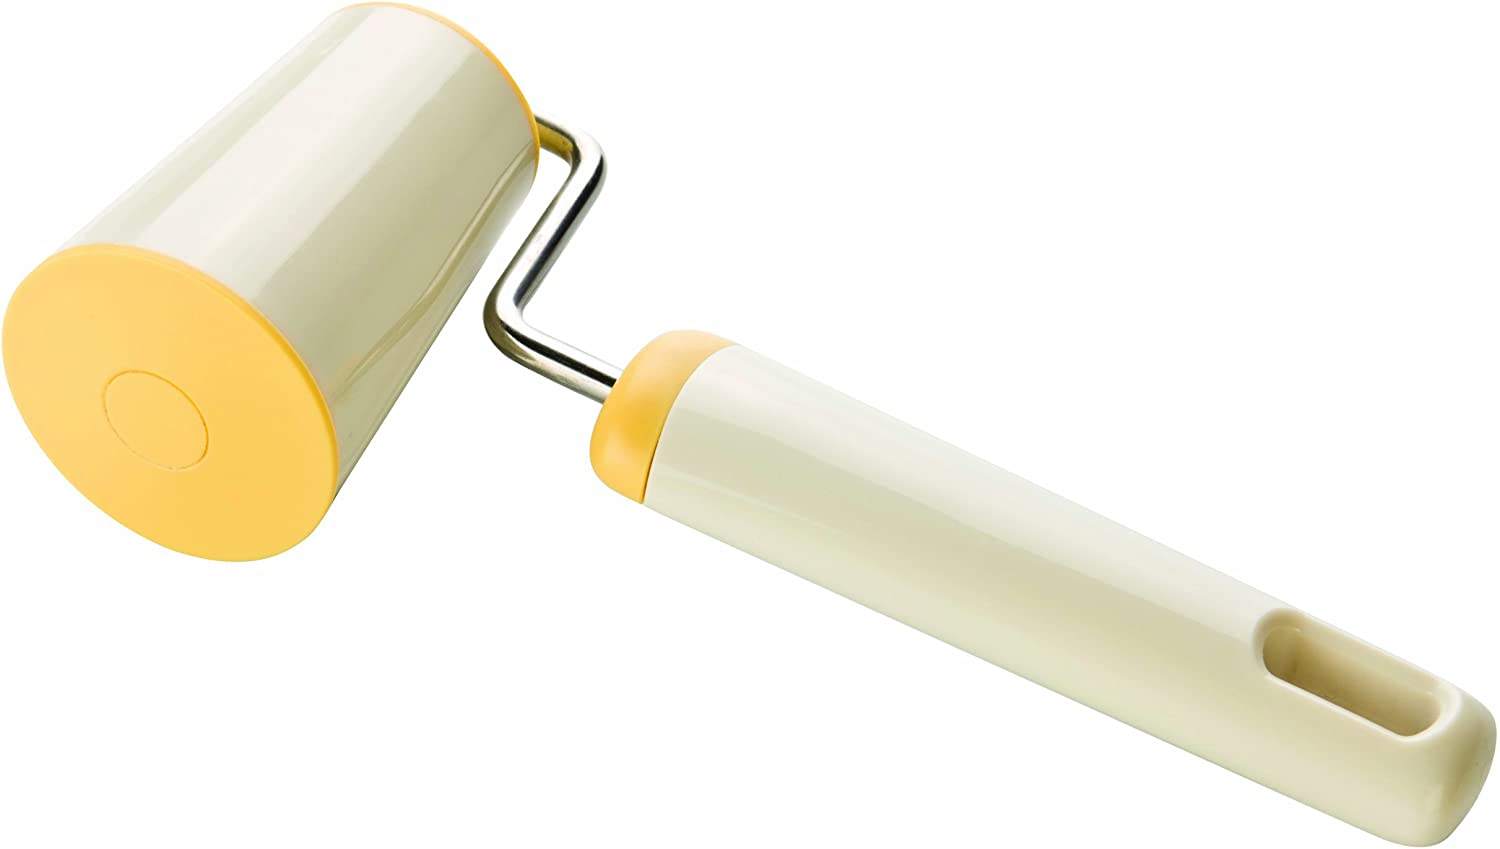 Tescoma Delicia Conical Rolling Pin